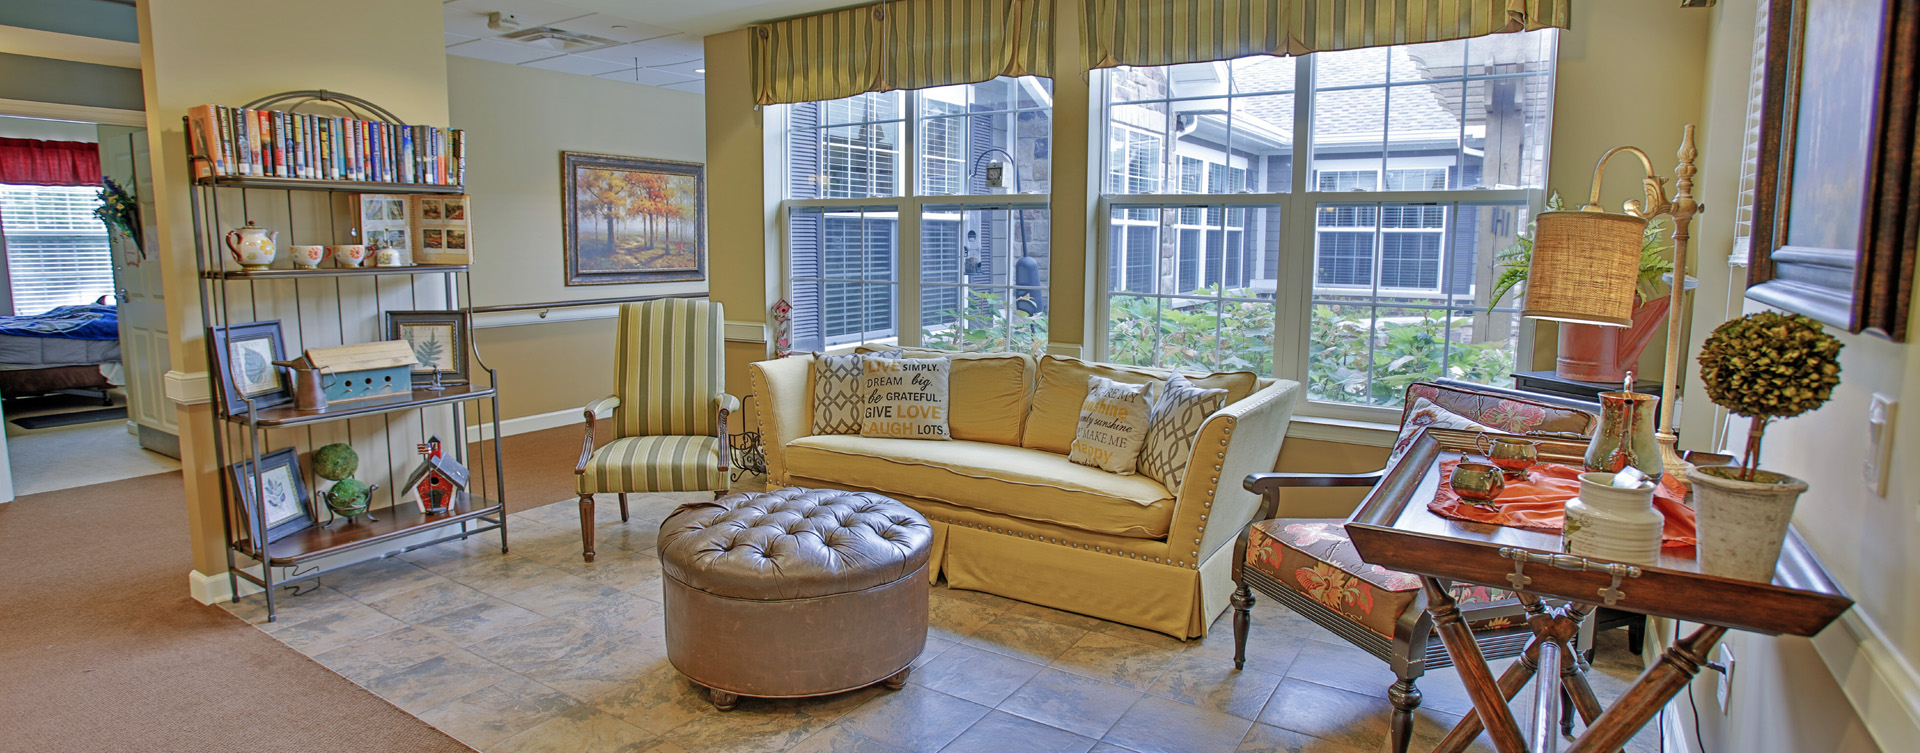 Relax in the warmth of the sunroom at Bickford of Greenwood